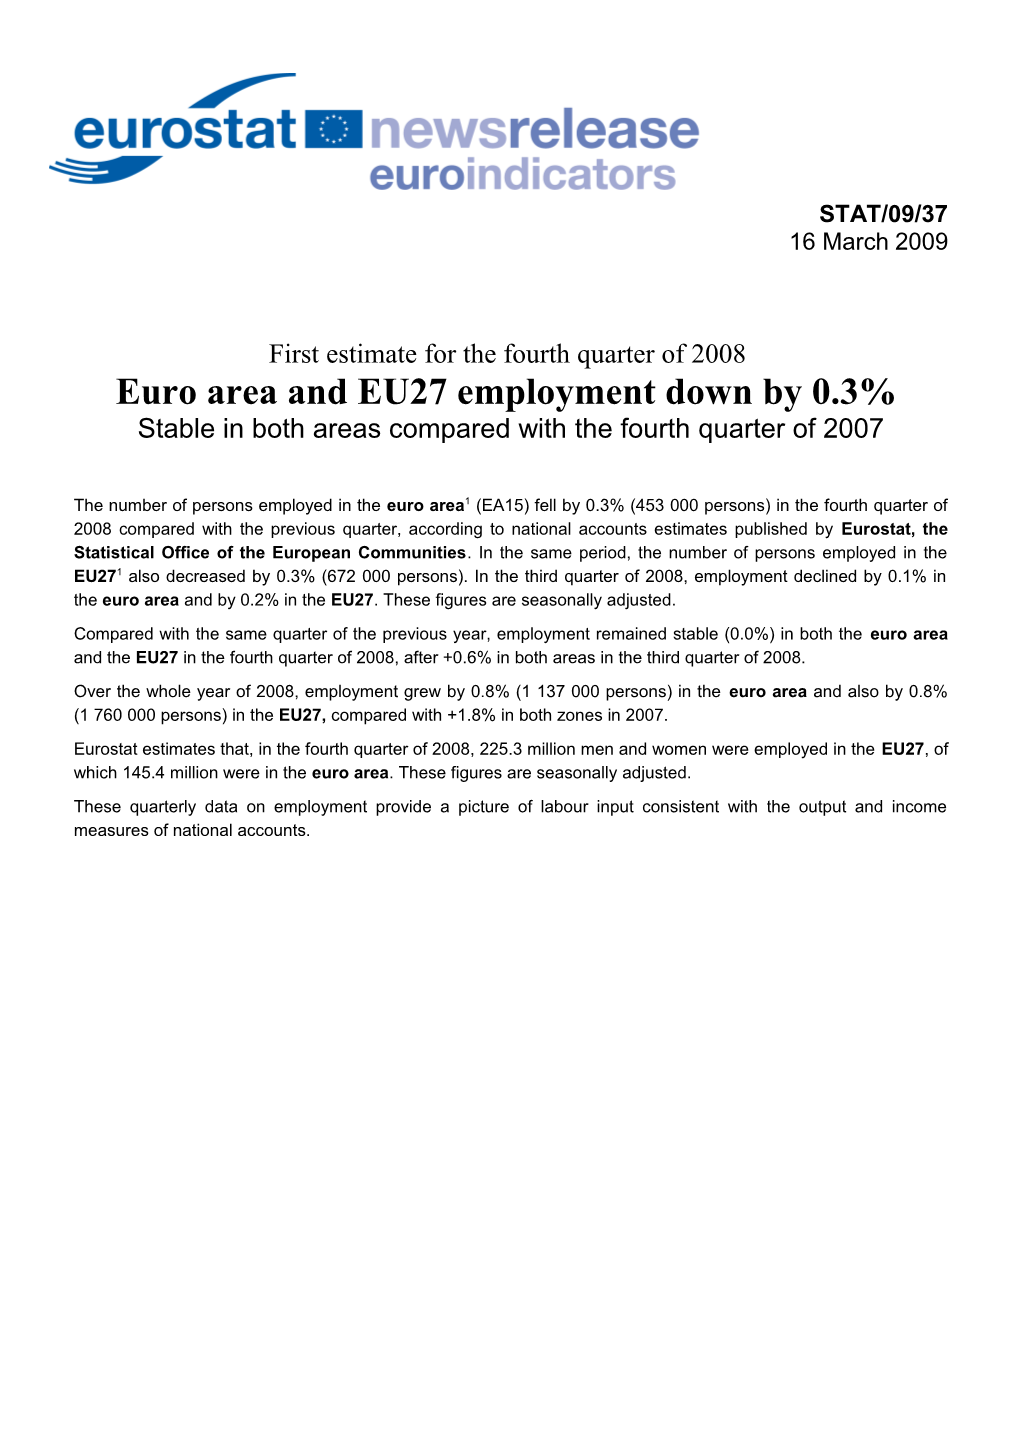 First Estimate for the Fourthquarter of 2008 Euro Areaand EU27 Employment Down by 0.3%